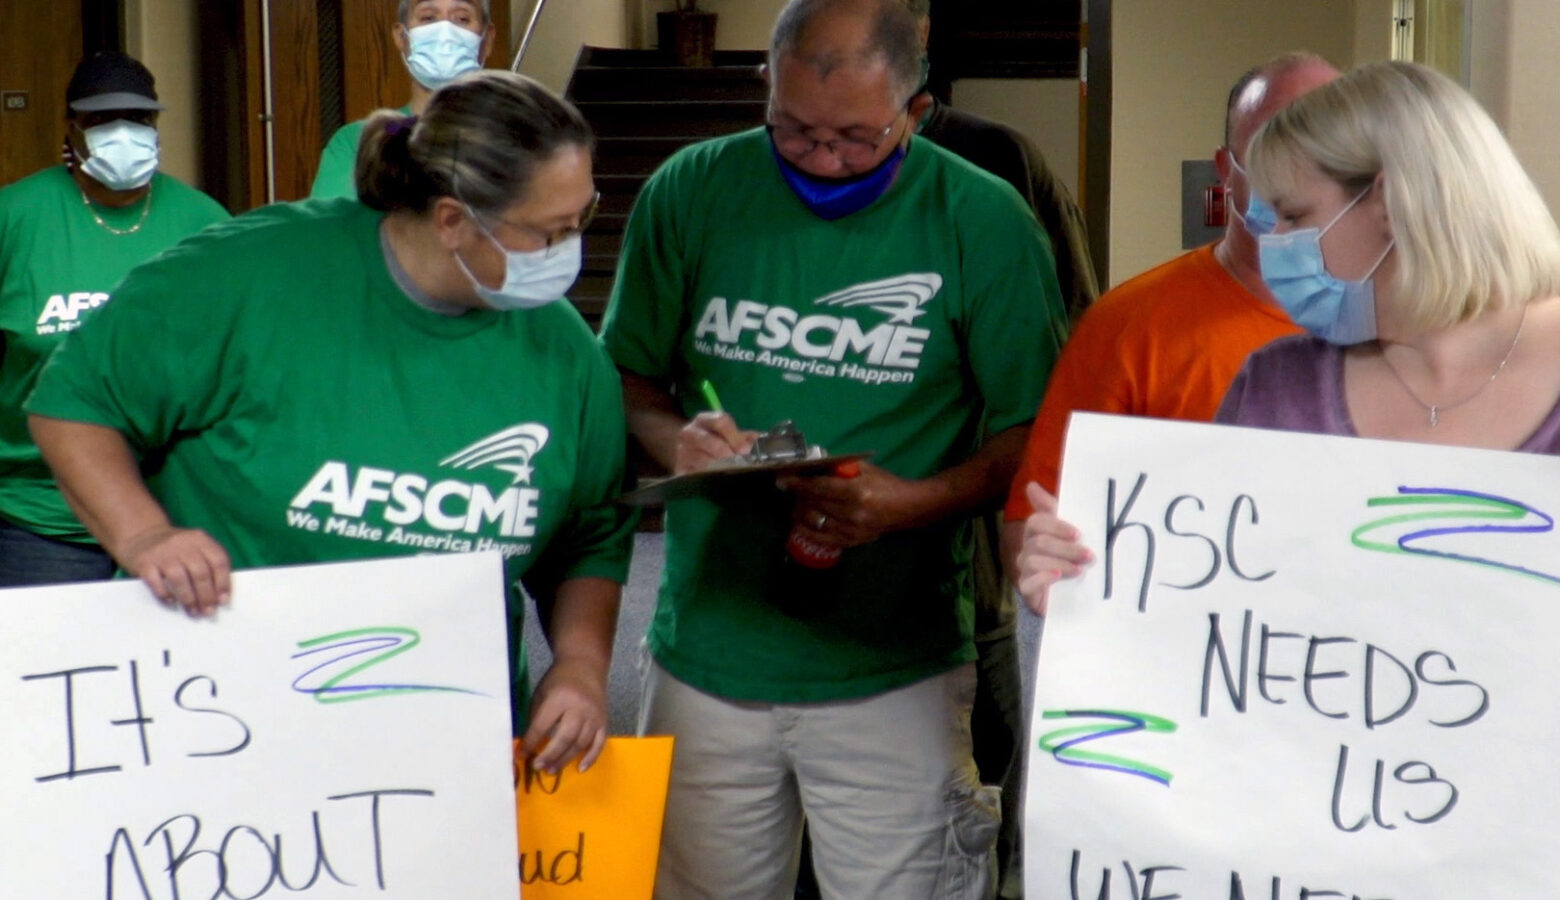 Kokomo School Corporation employees seeking union recognition have continued requesting to speak at board meetings, but have been mostly denied the opportunity because of board policies. (Alan Mbathi/IPB News)